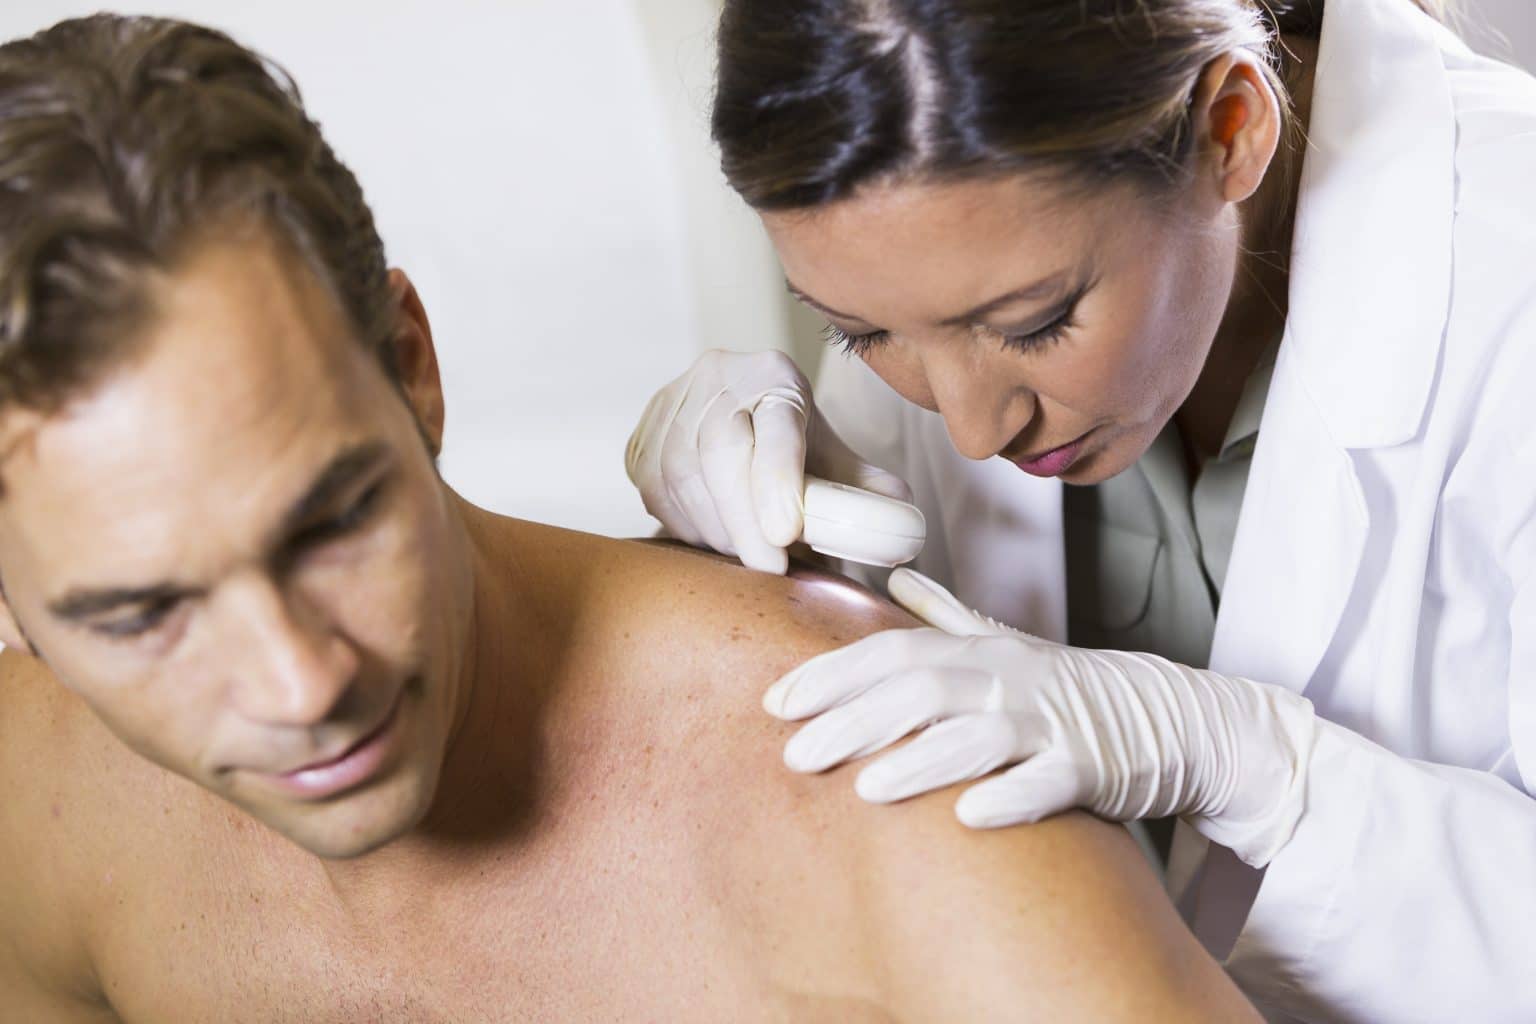 Female physician examining male patient with dermascope, looking for signs of skin cancer.